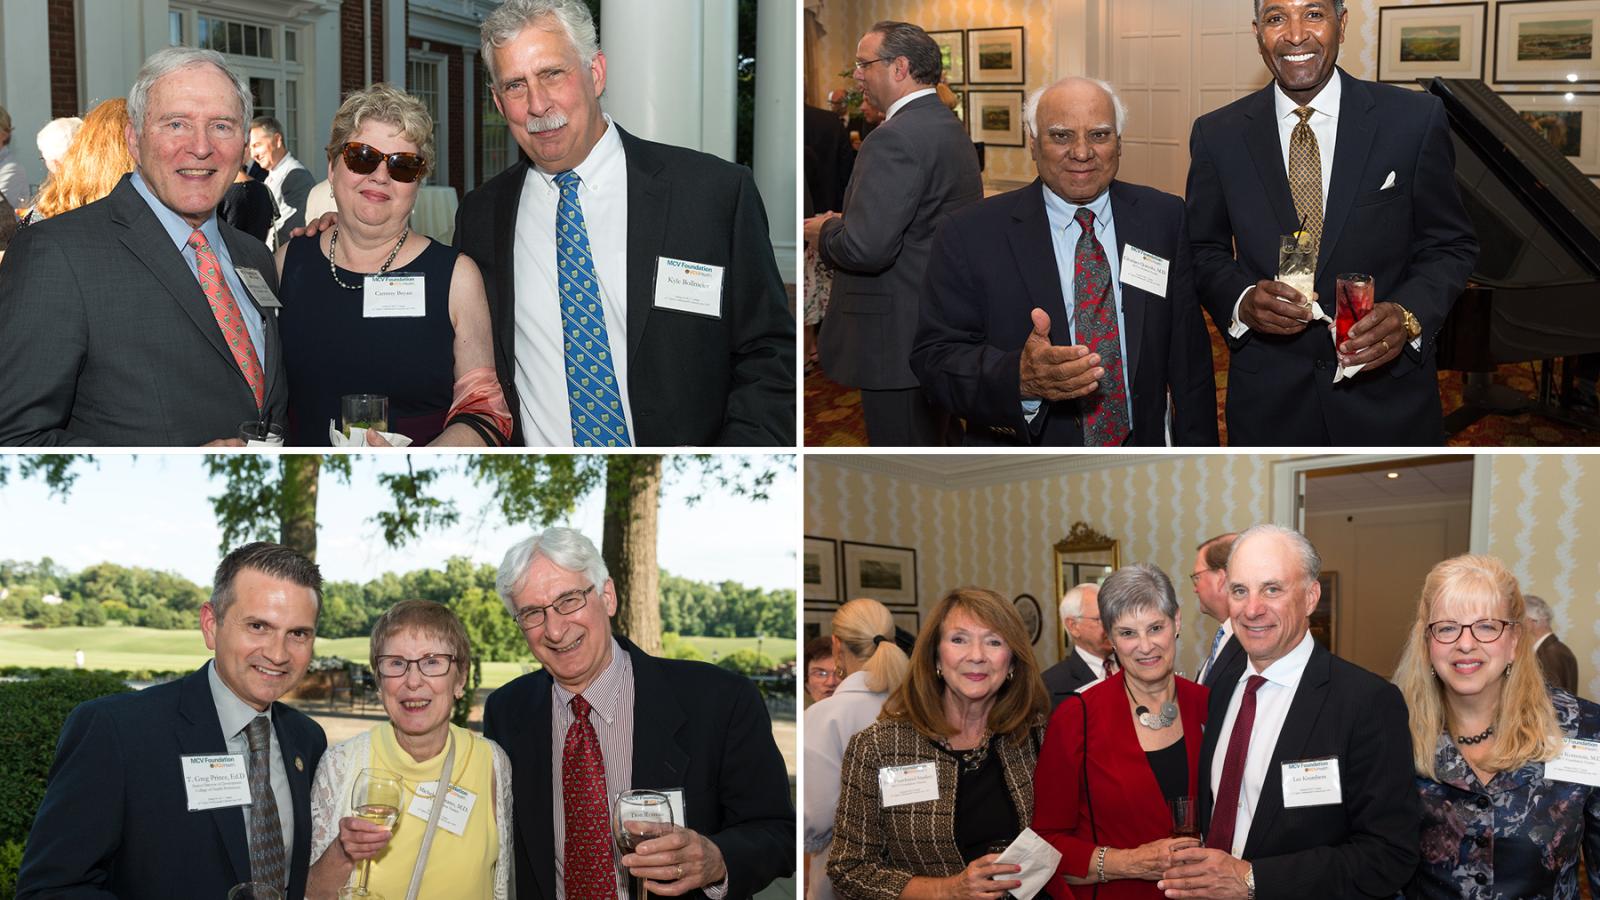 Friends of the MCV Foundation mingle and celebrate at our 2019 dinner and awards ceremony held at the Country Club of Virginia.